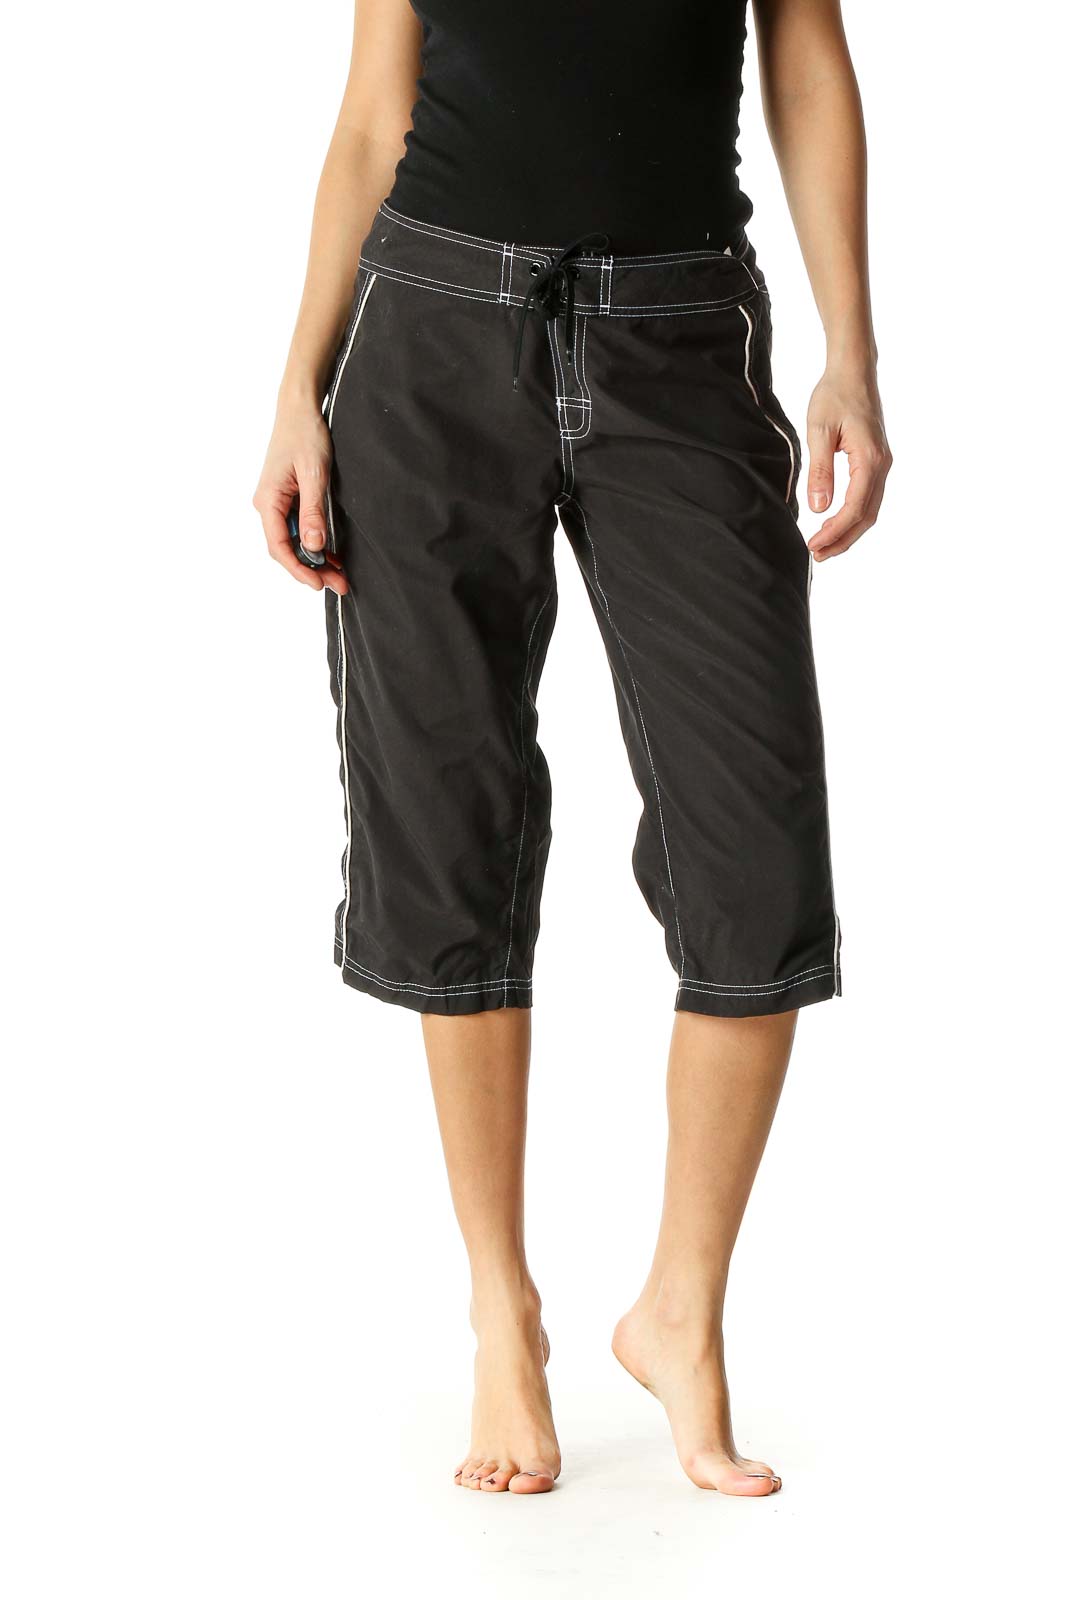 Black Solid Casual Shorts Front